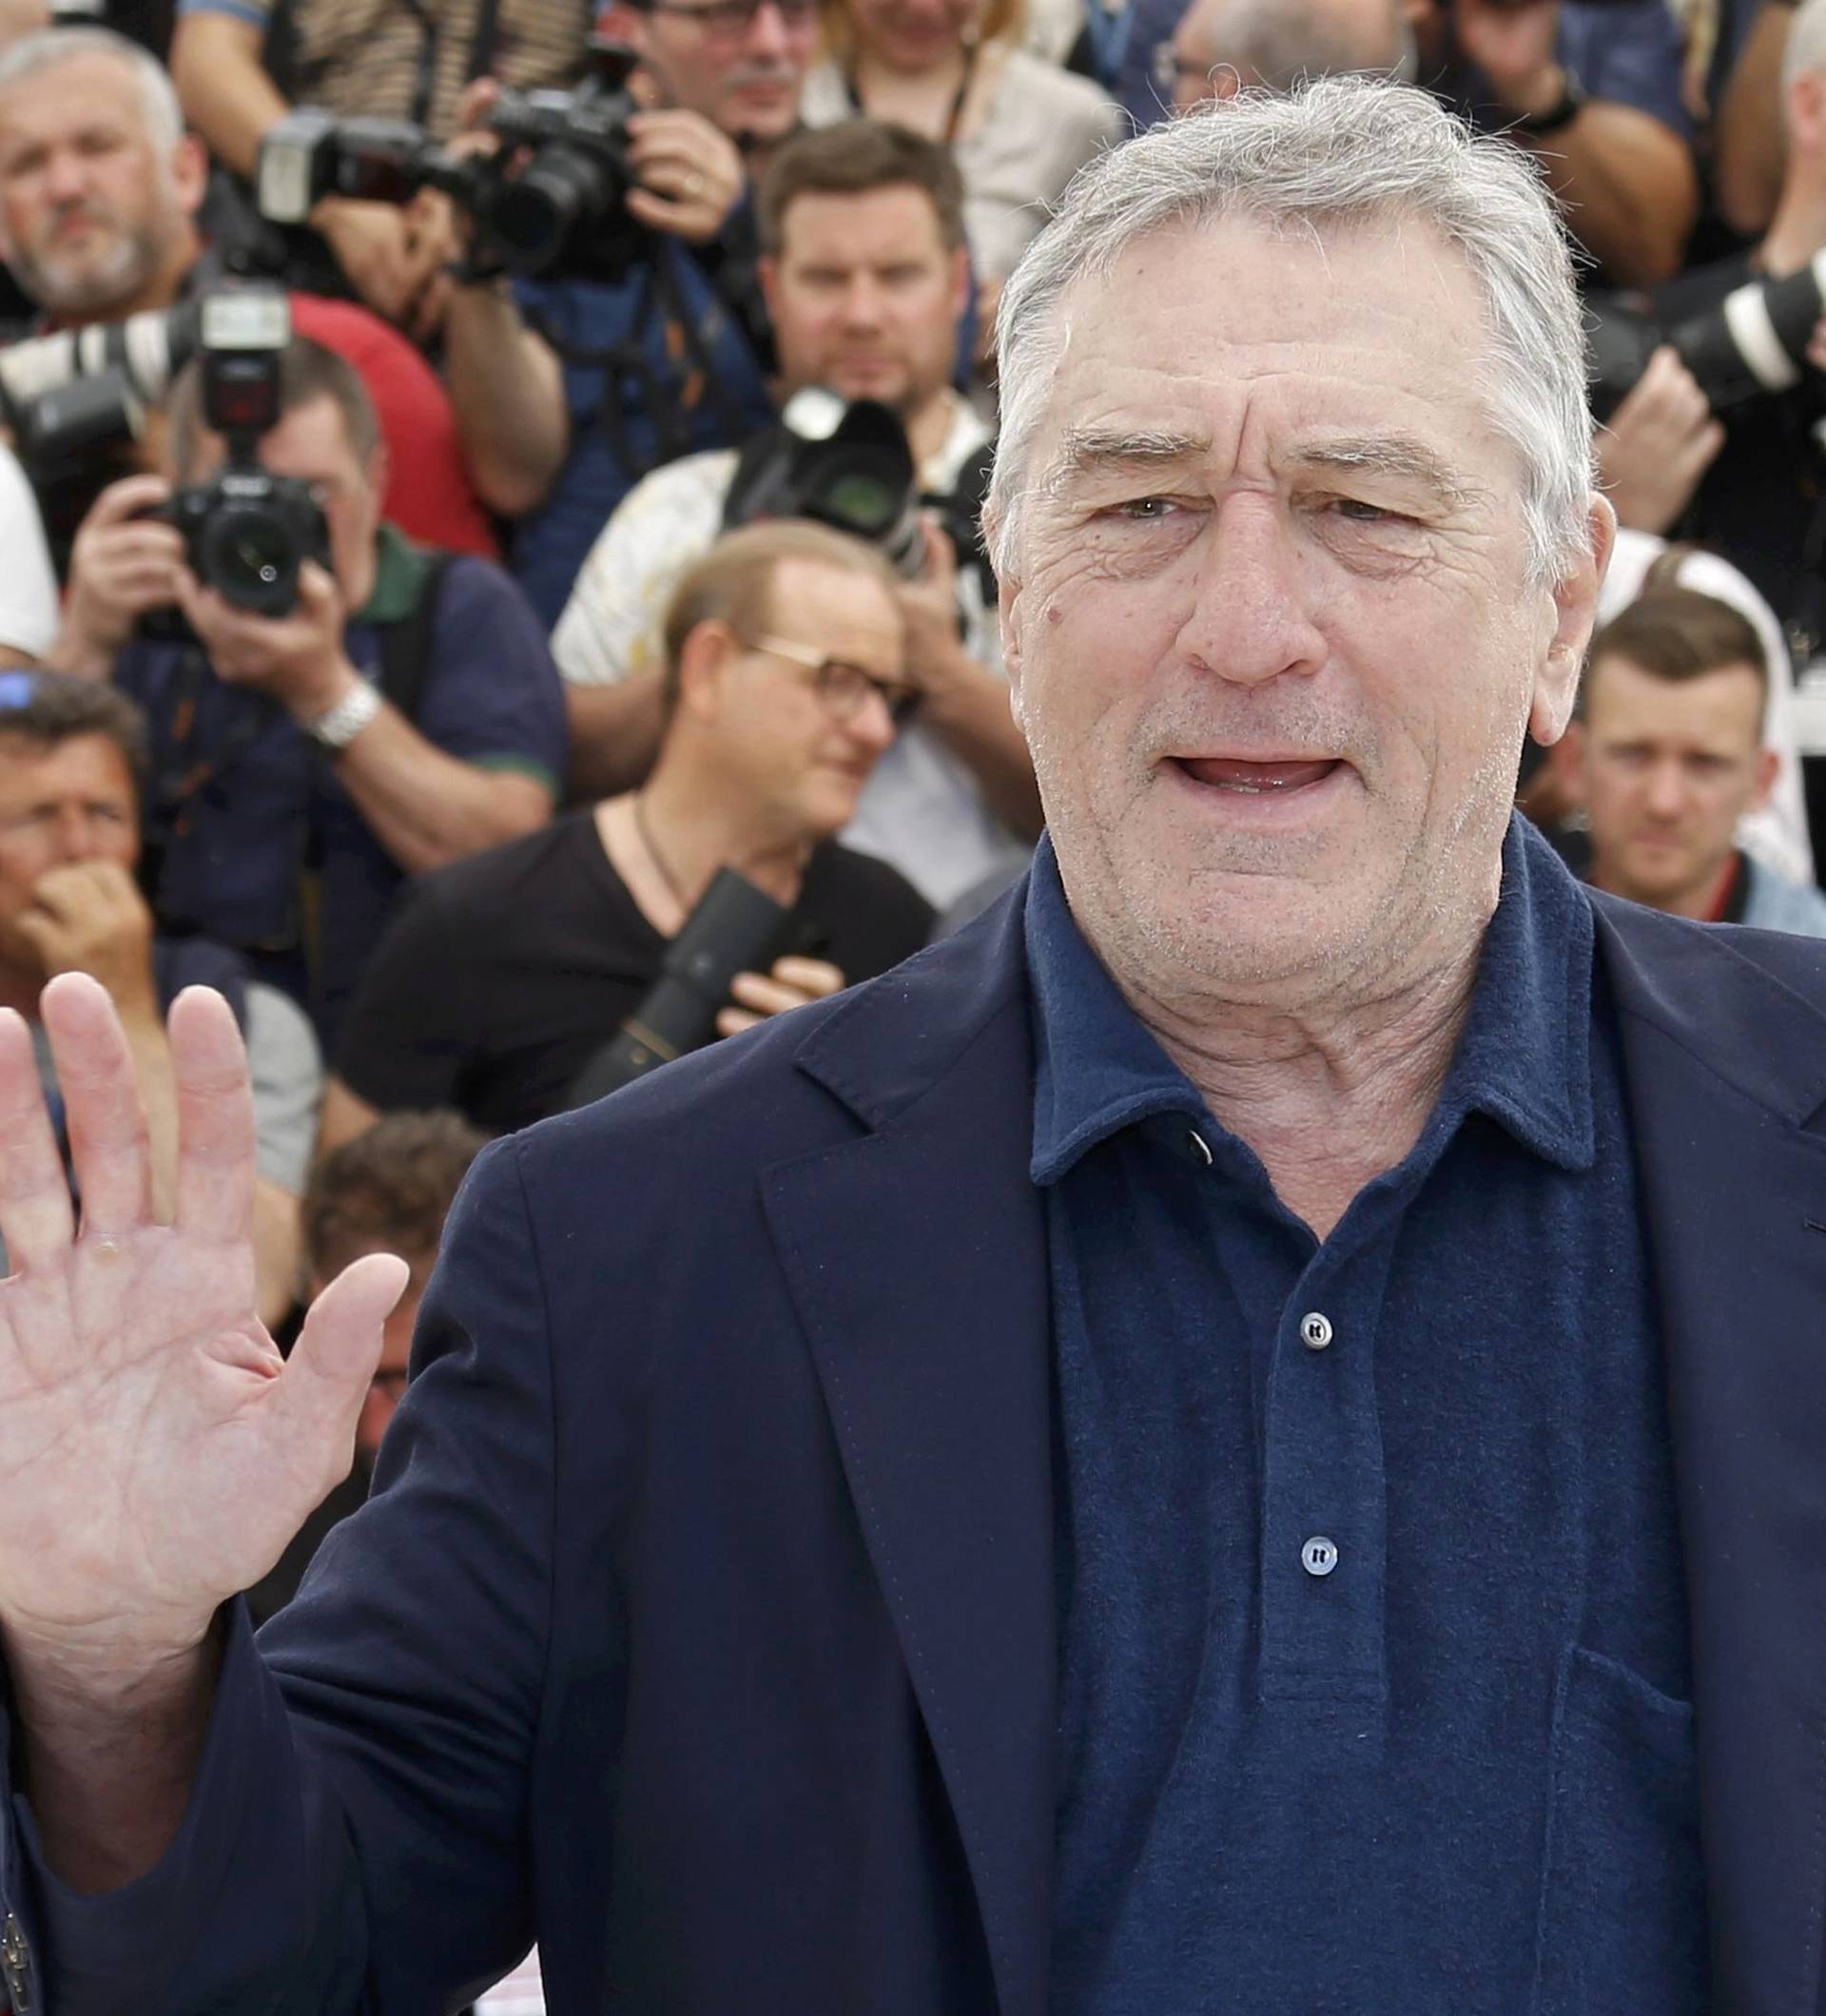 Actor Robert De Niro poses during a photocall for the film "Hands of stone" out of competition at the 69th Cannes Film Festival in Cannes